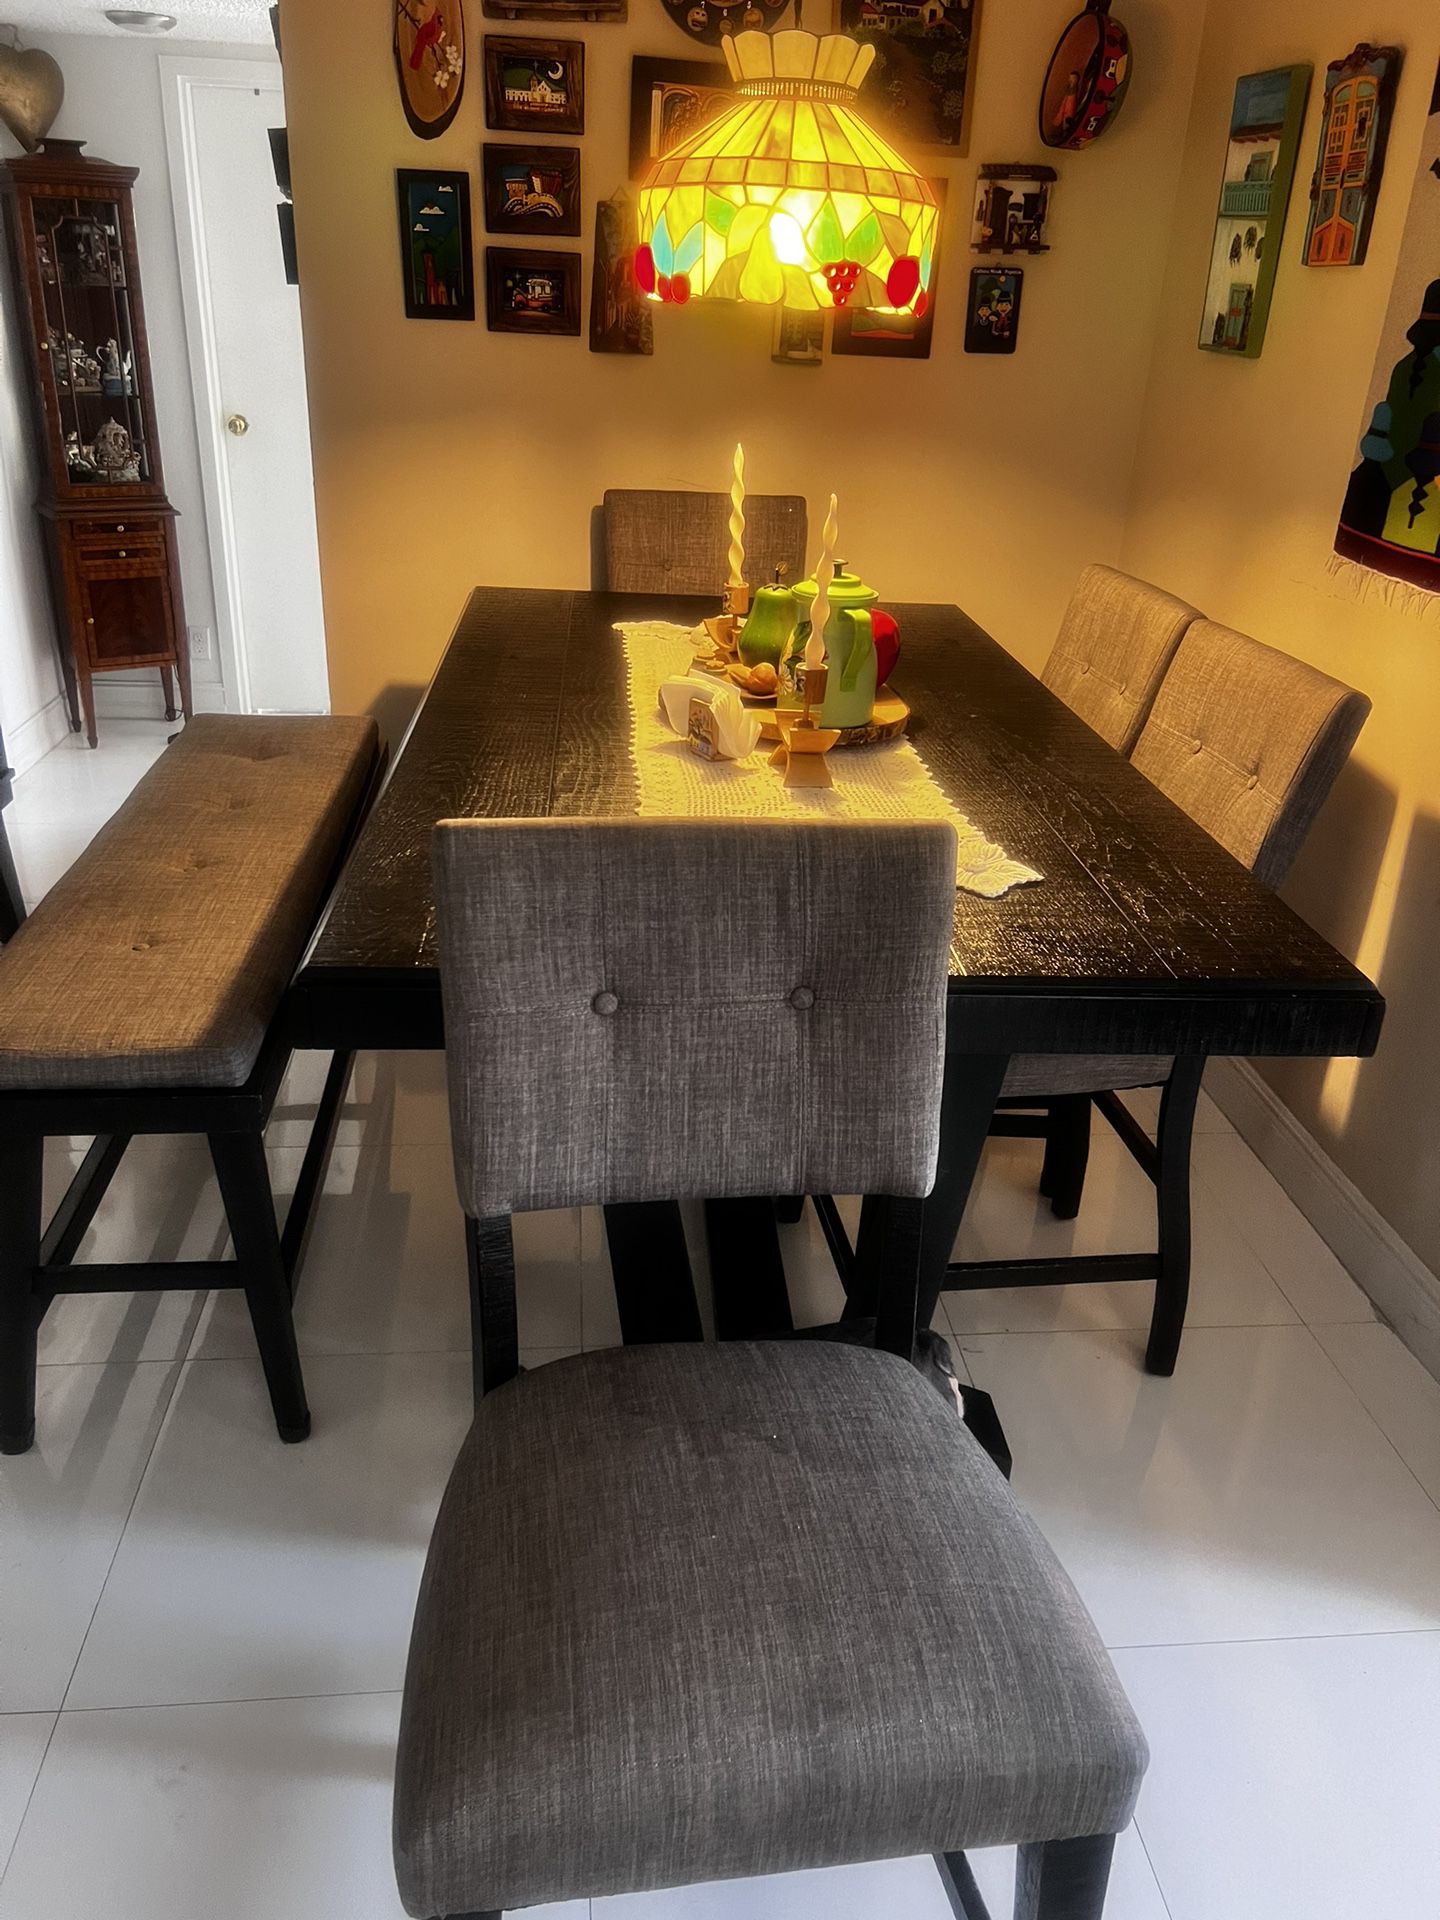 6 Person Dining Table Set 